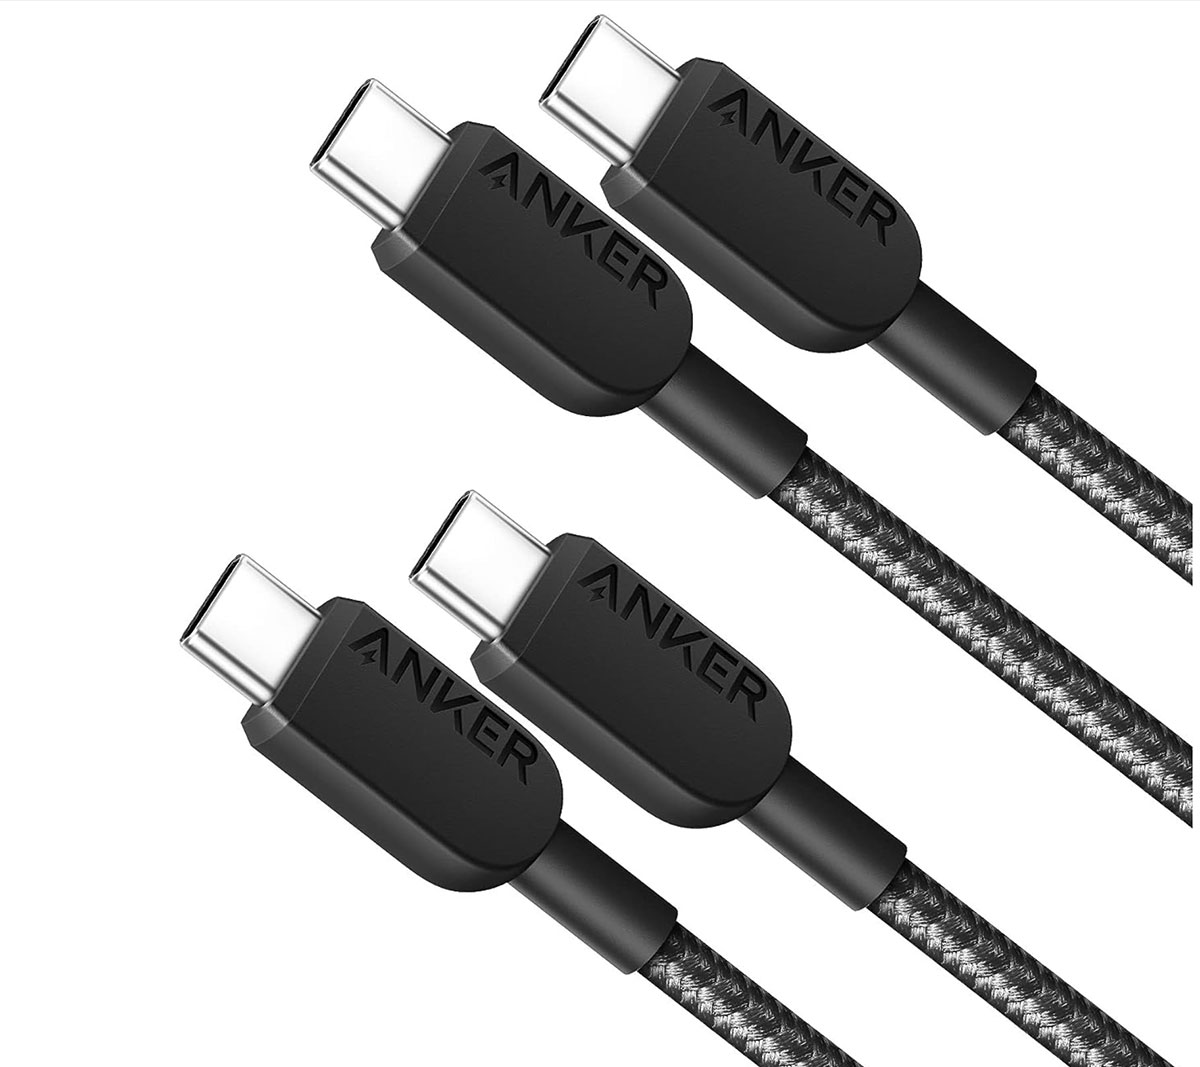 Best USB-C charging cables for iPhone, iPad and Mac